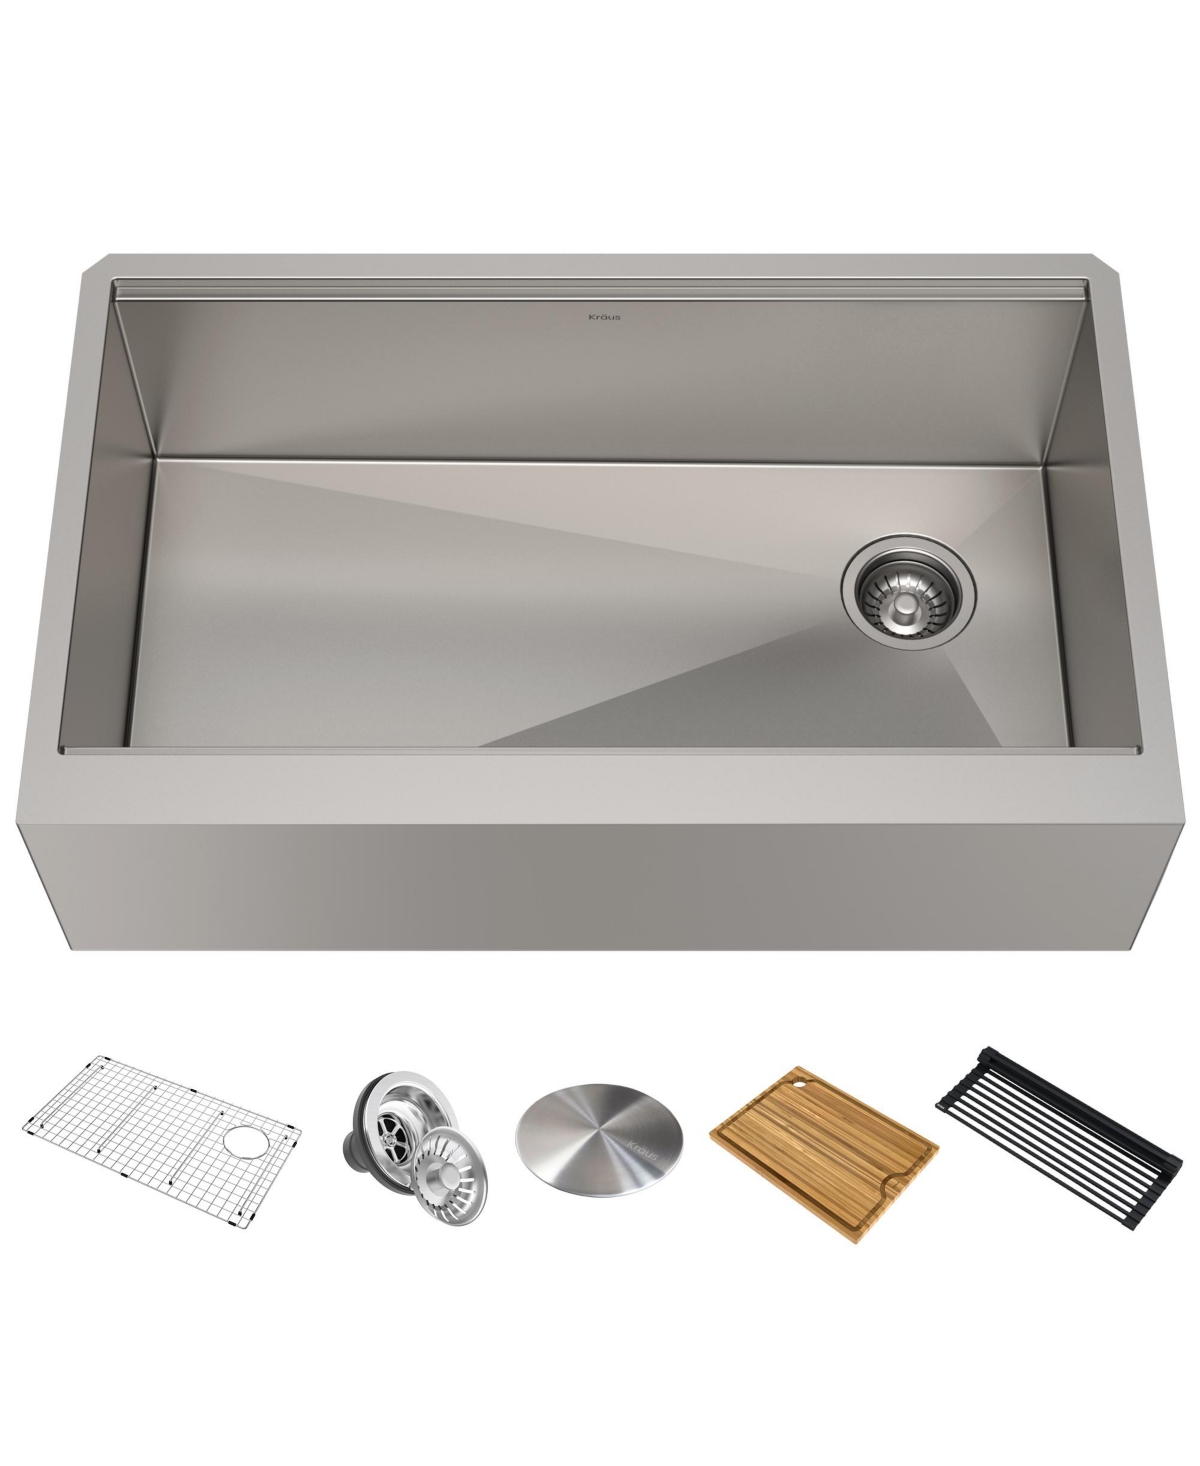 Kore 33 in. Workstation Farmhouse Flat Apron Front 16 Gauge Single Bowl Stainless Steel Kitchen Sink with Accessories - Stainless steel